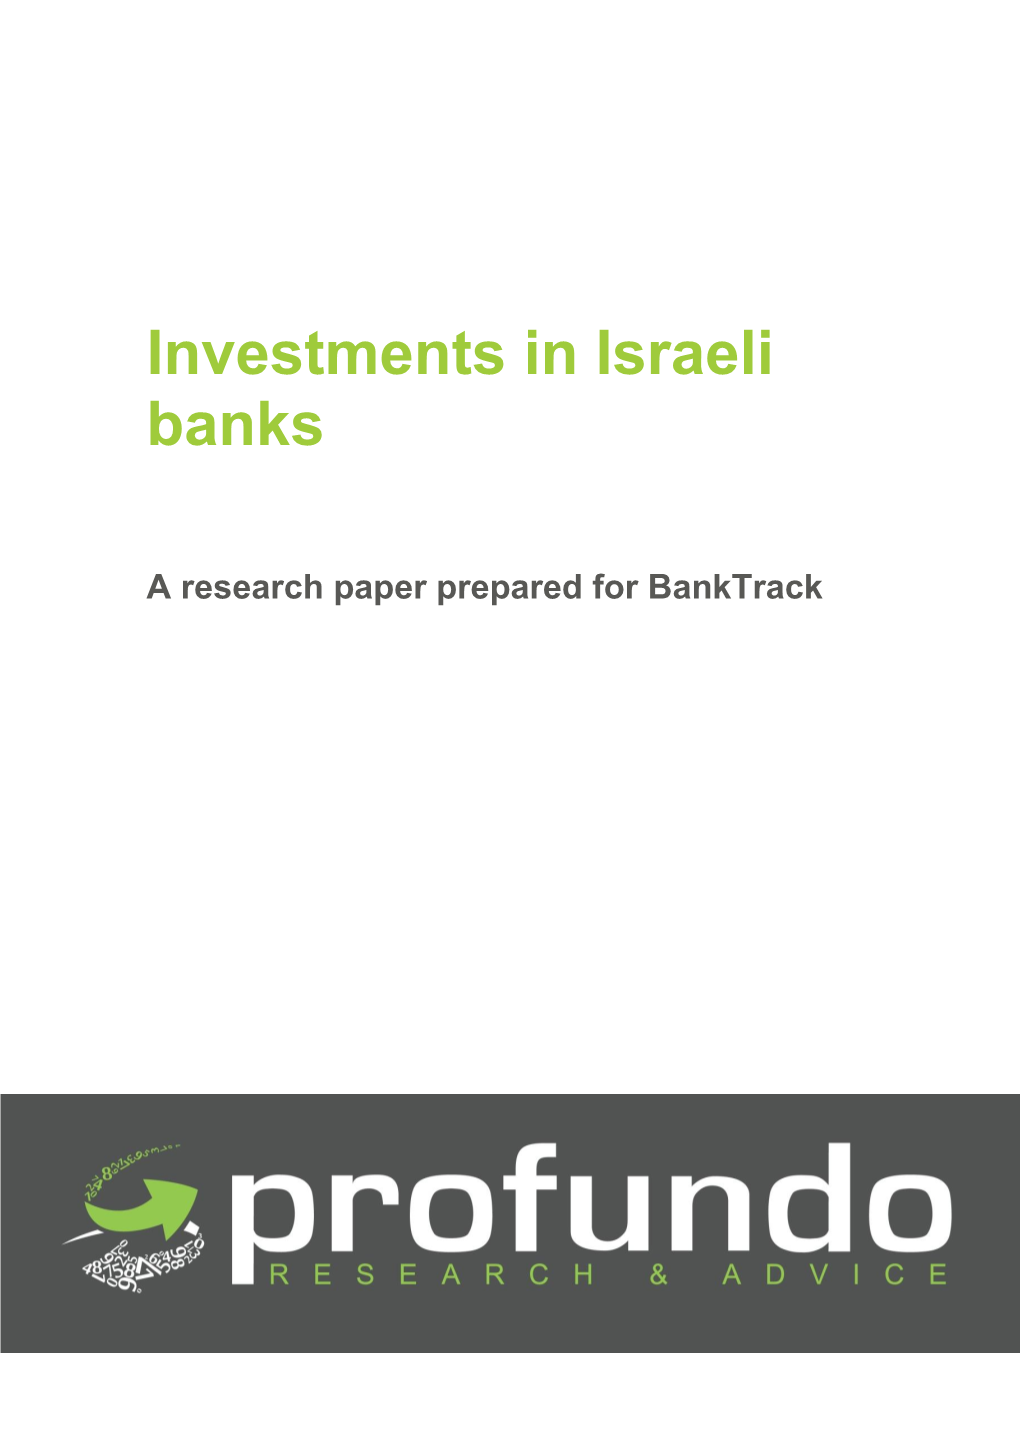 Internal Campaign Documents 2016-07-01 00:00:00 Investments in Israeli Banks a Research Paper